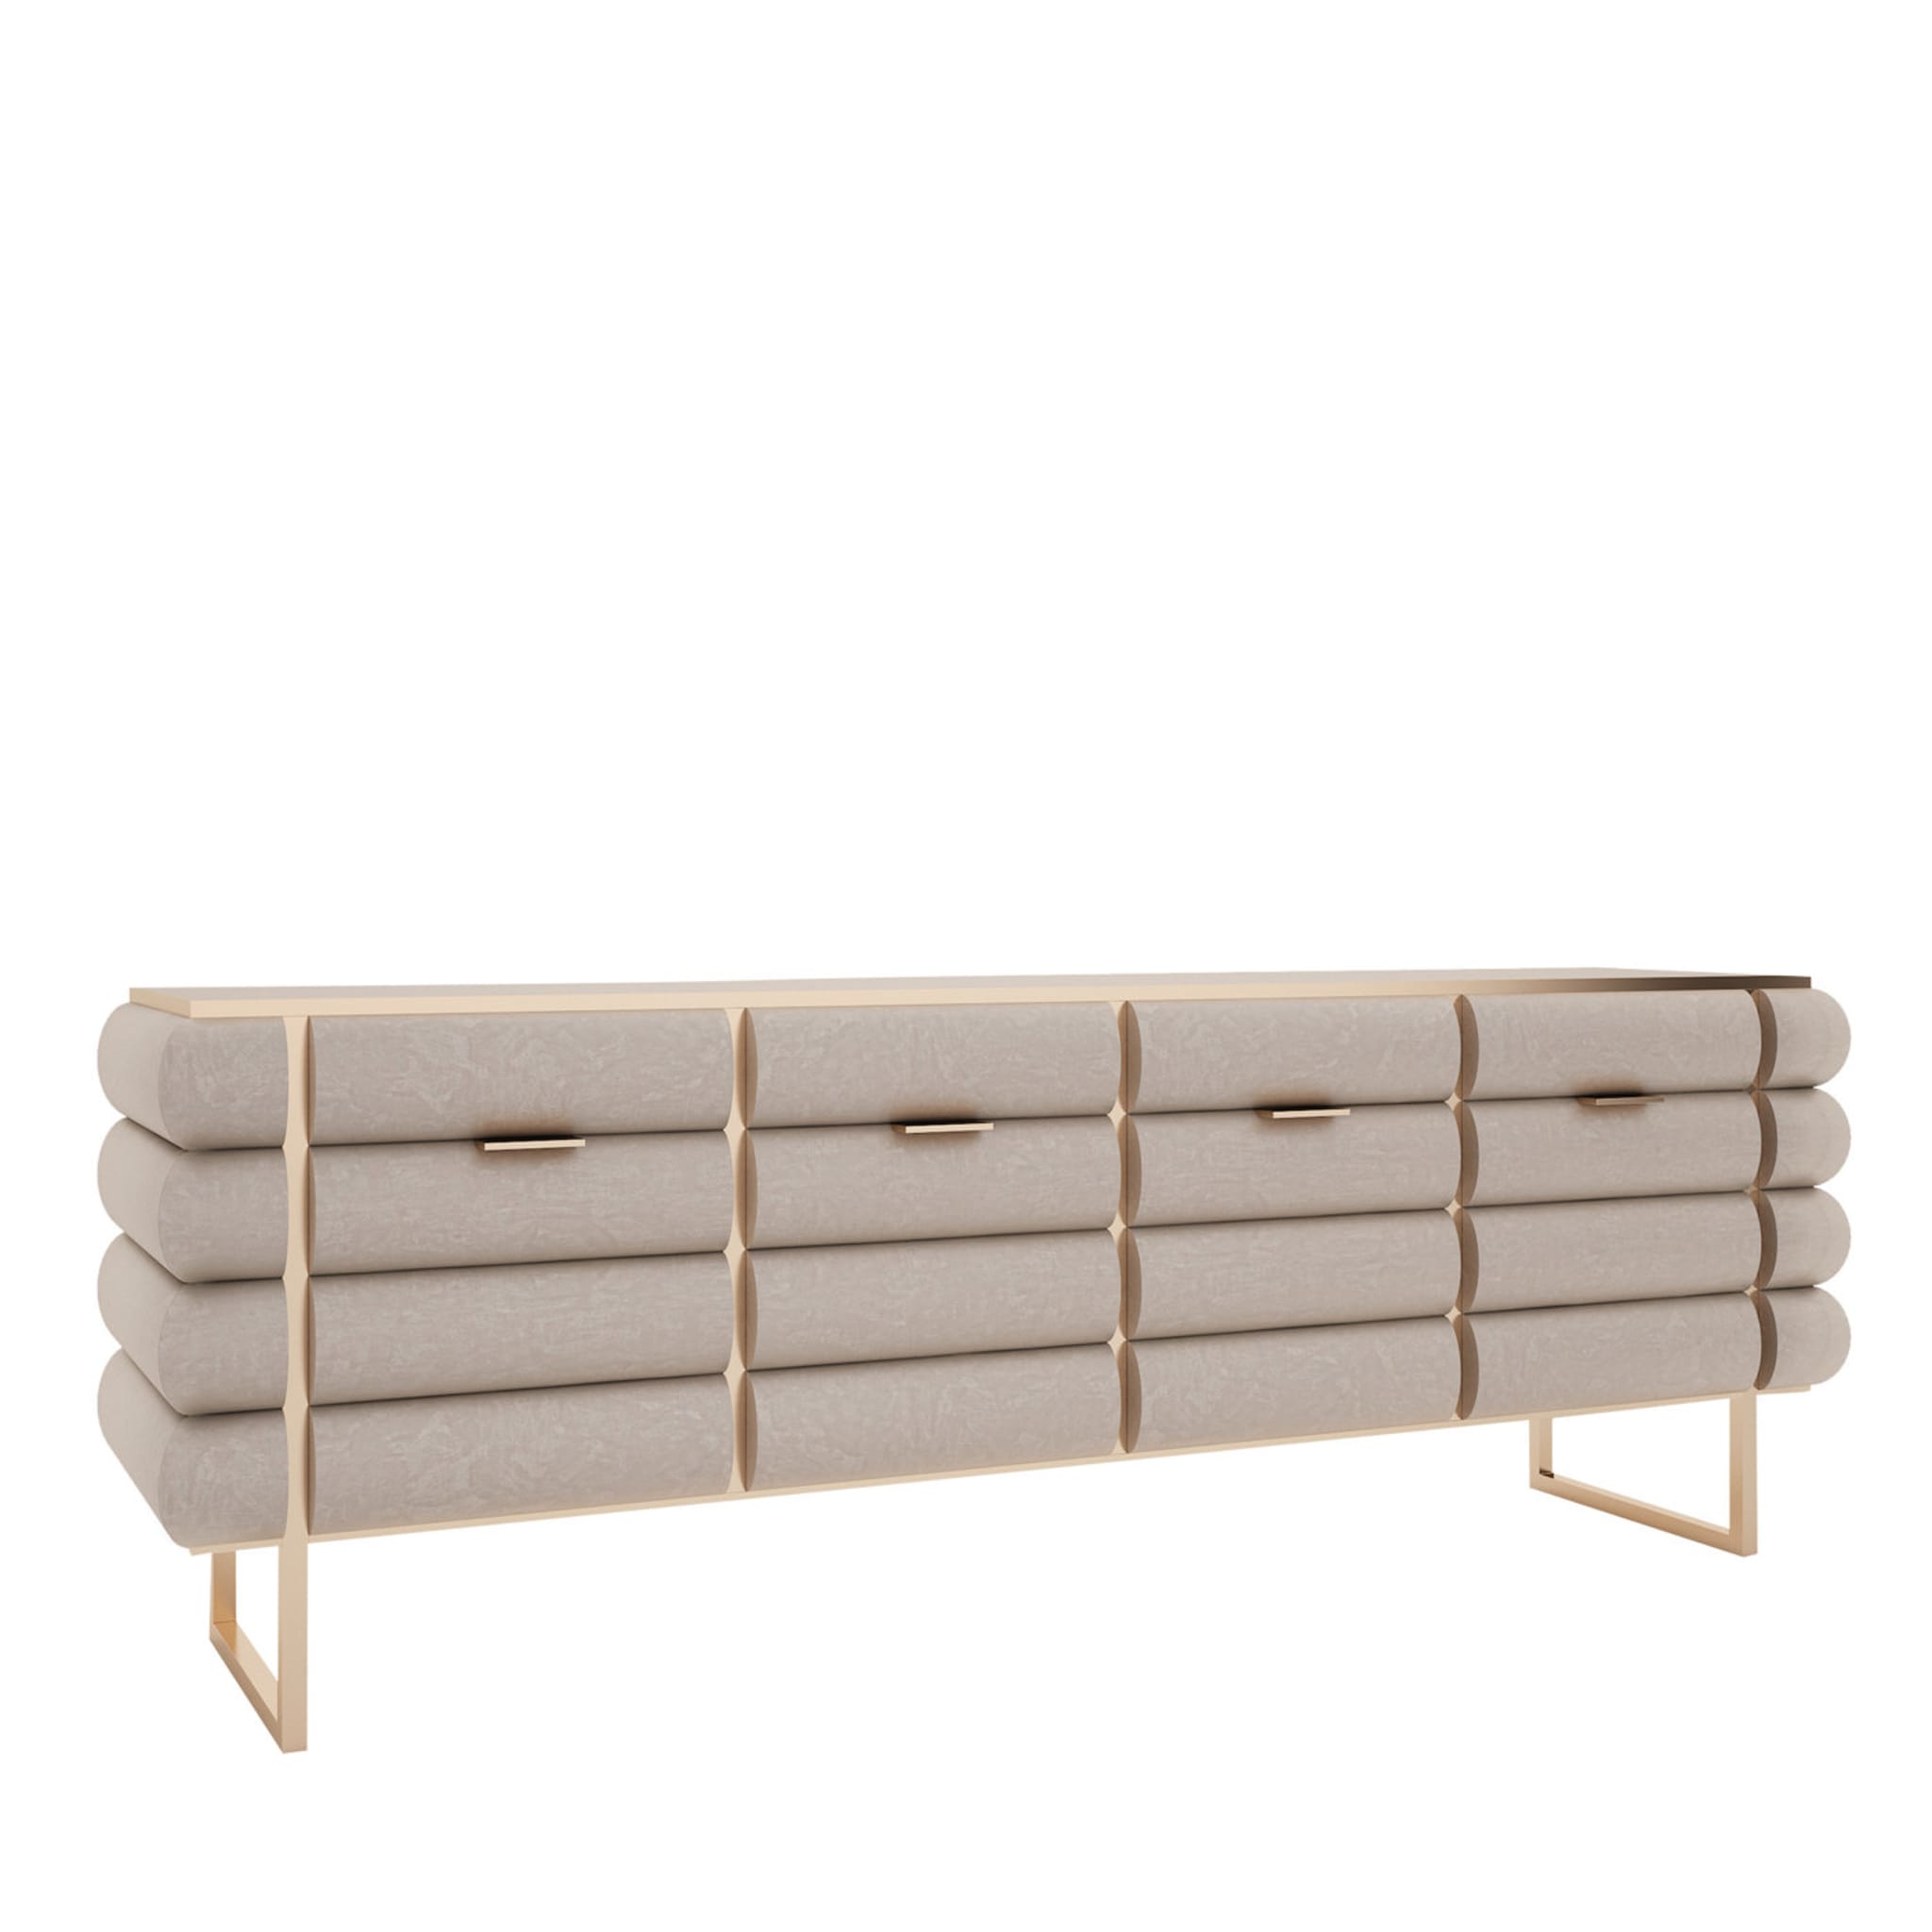 Empire Sideboard by Giannella Ventura - Main view